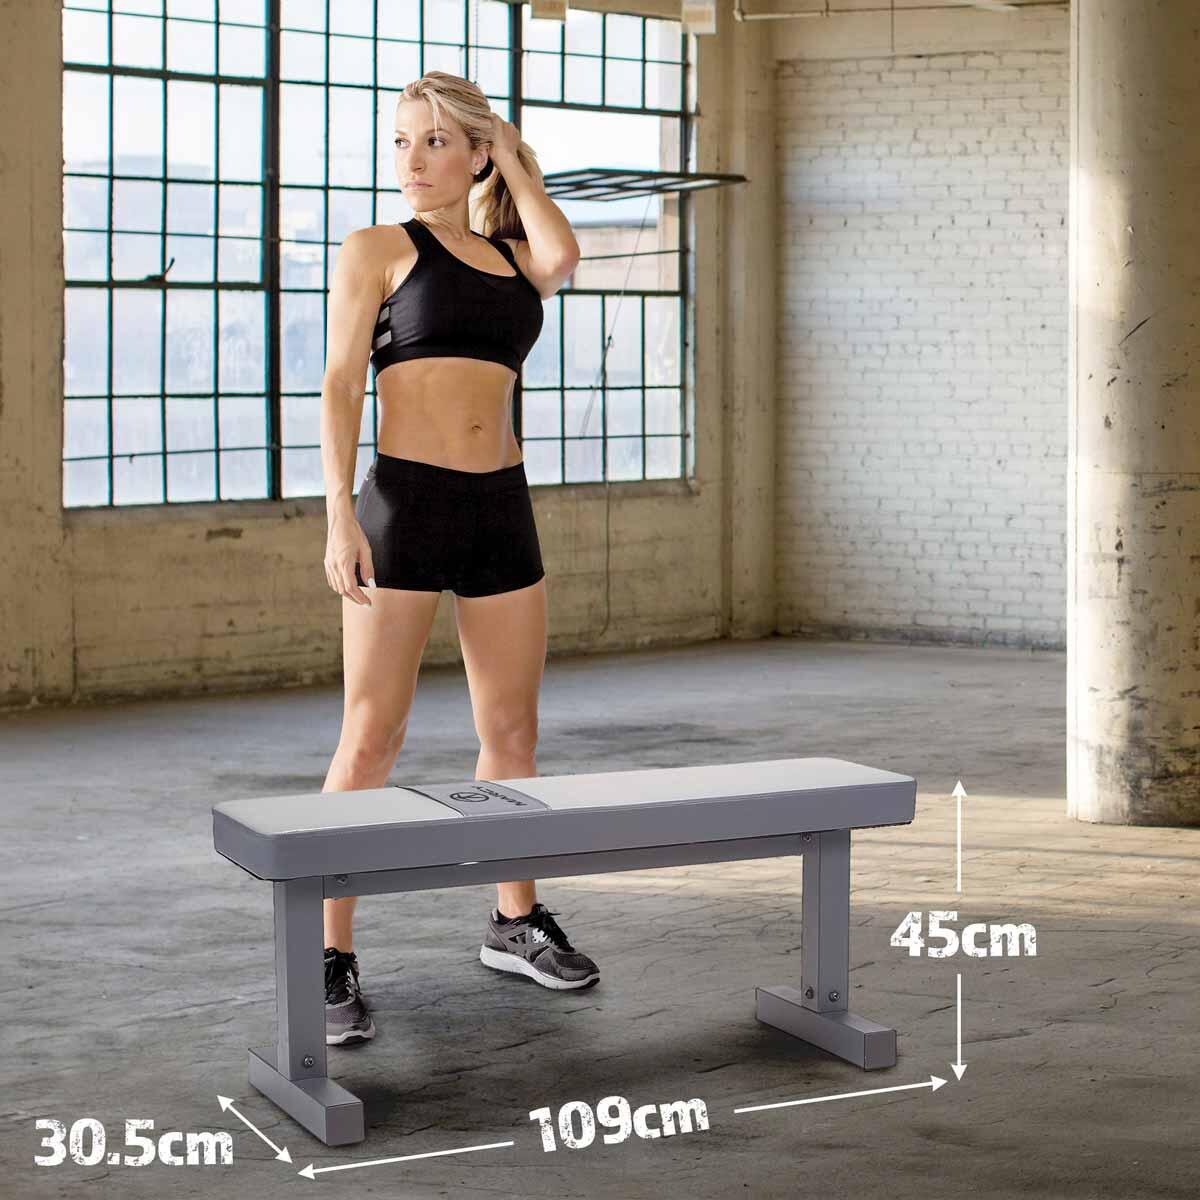 MARCY JD2.1 FLAT WEIGHT BENCH 7/7